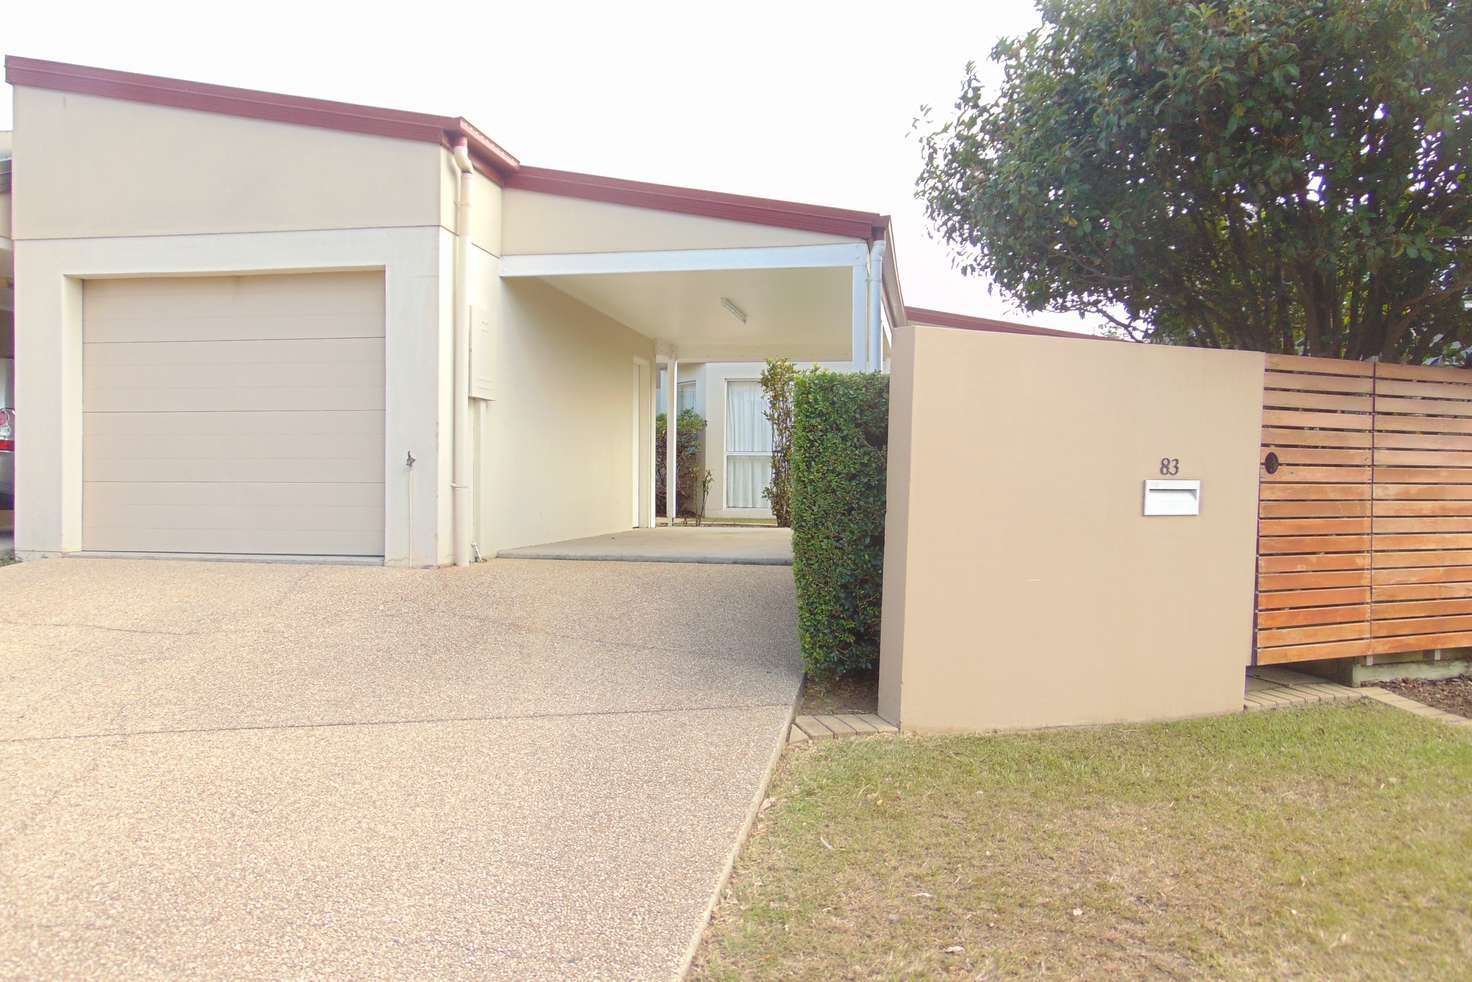 Main view of Homely house listing, 83 Nottingham Street, Kippa-Ring QLD 4021